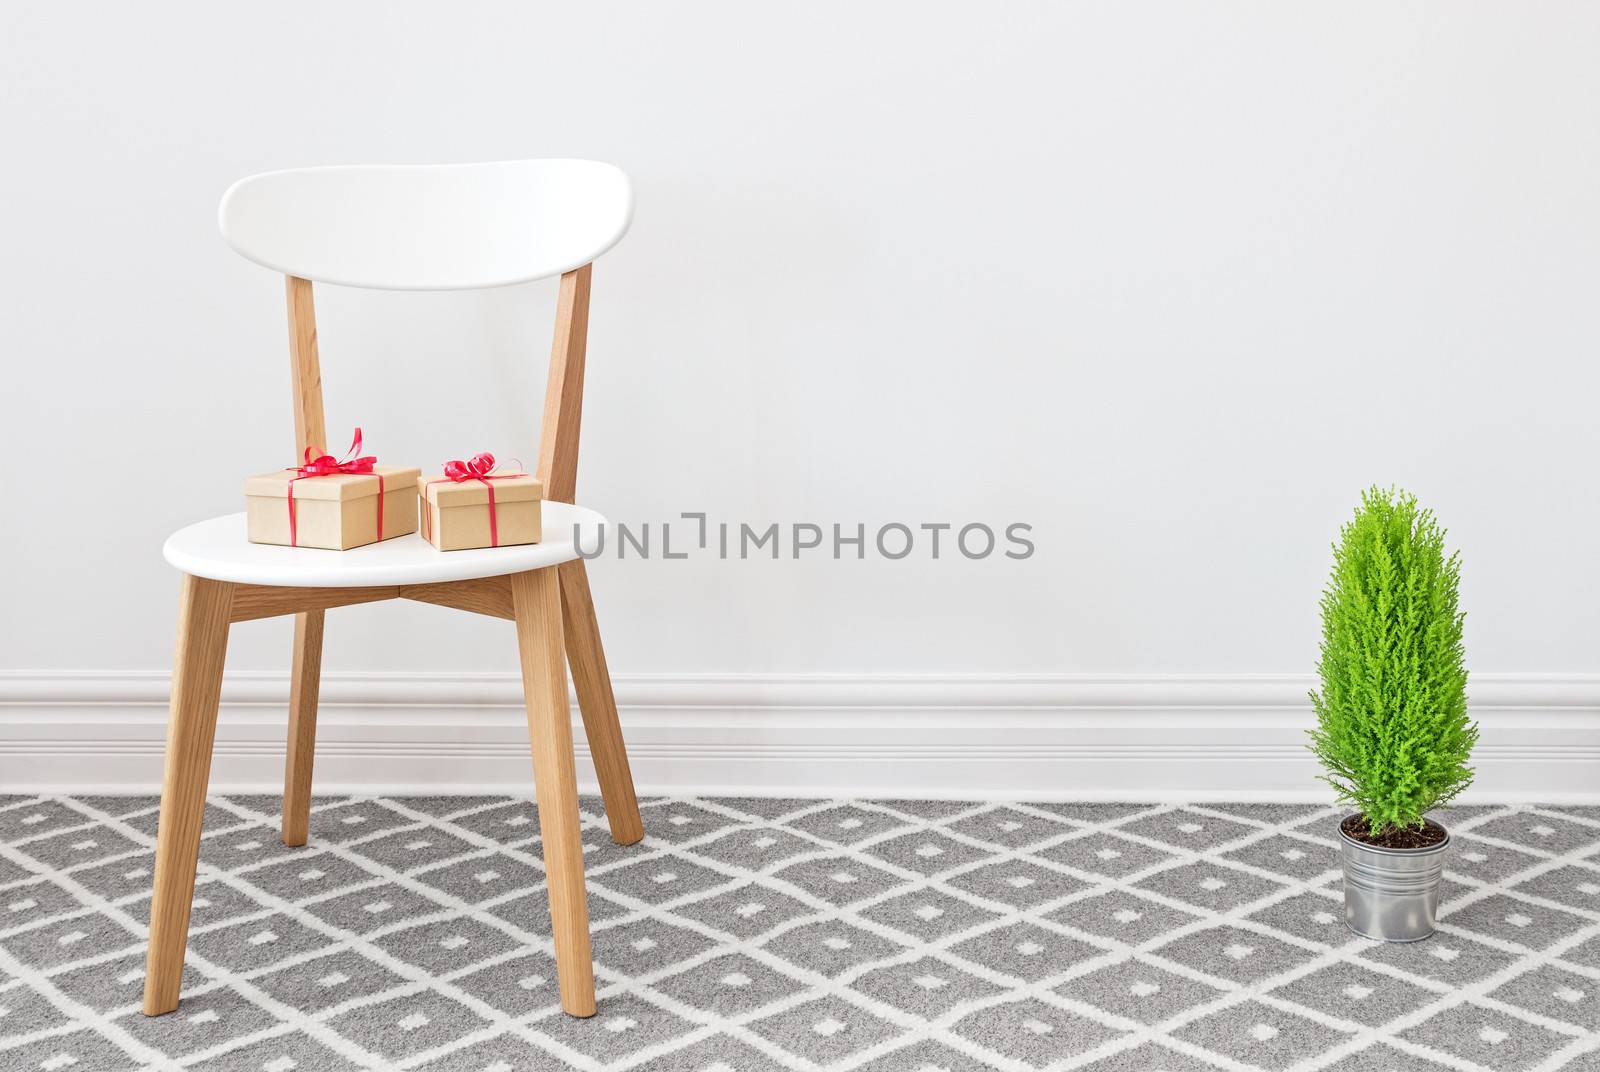 Presents on a white chair, and little green tree by anikasalsera